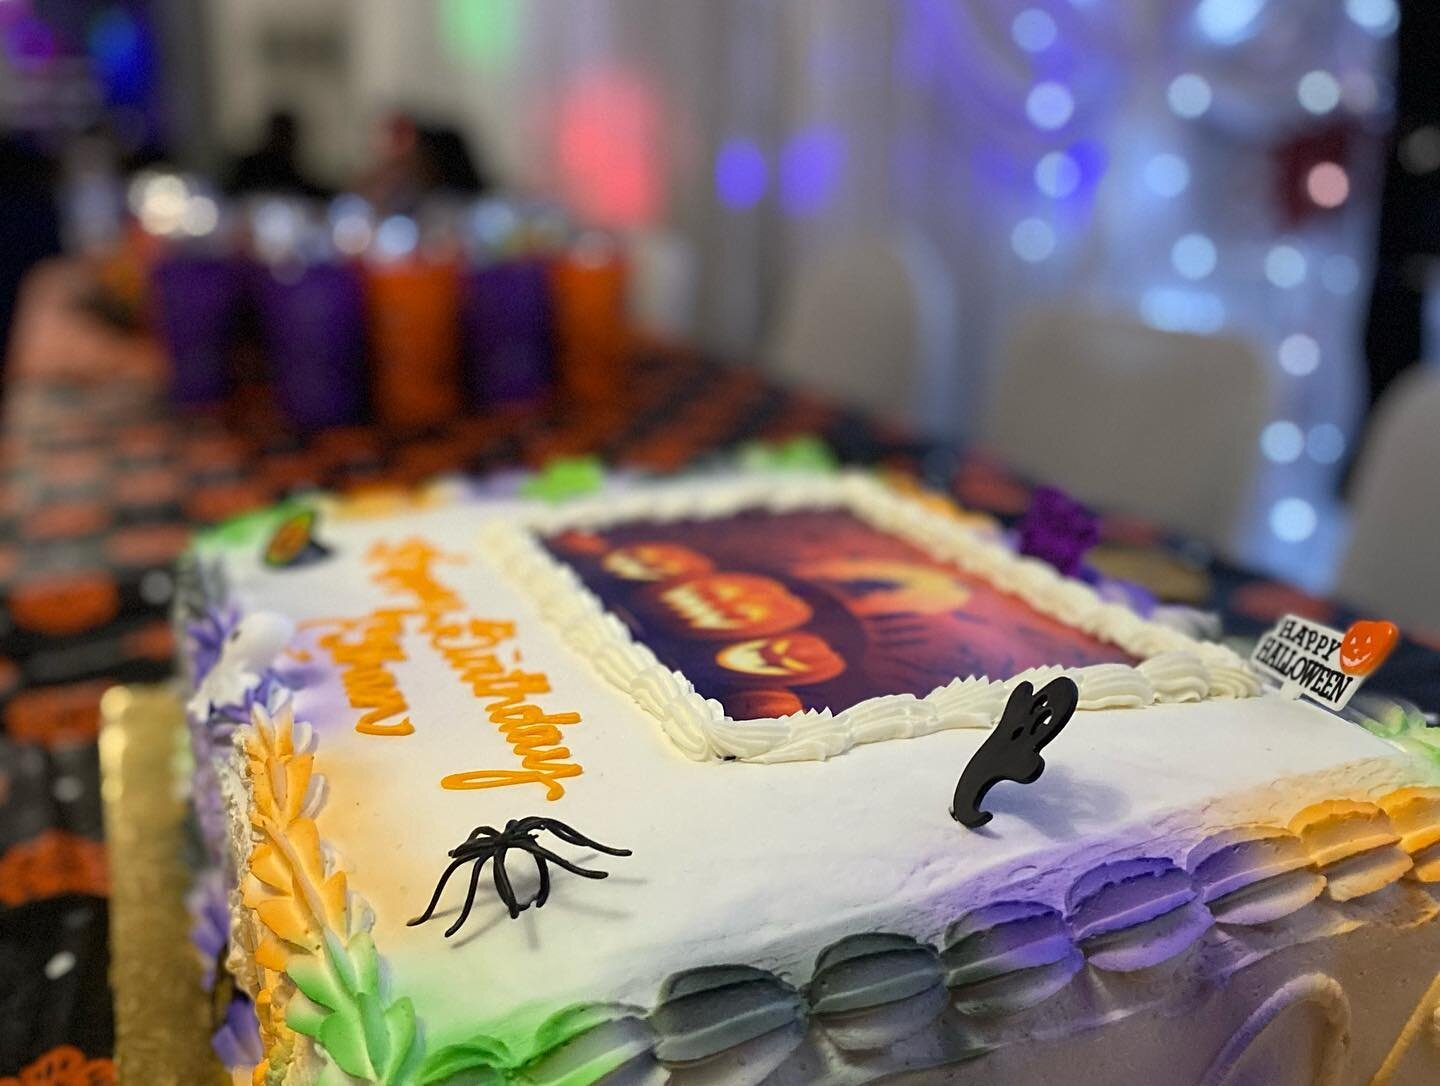 We we&rsquo;re the perfect venue for the #Halloween themed birthday party last weekend! Book a tour and explode our unique, all-inclusive packages. Link in bio.